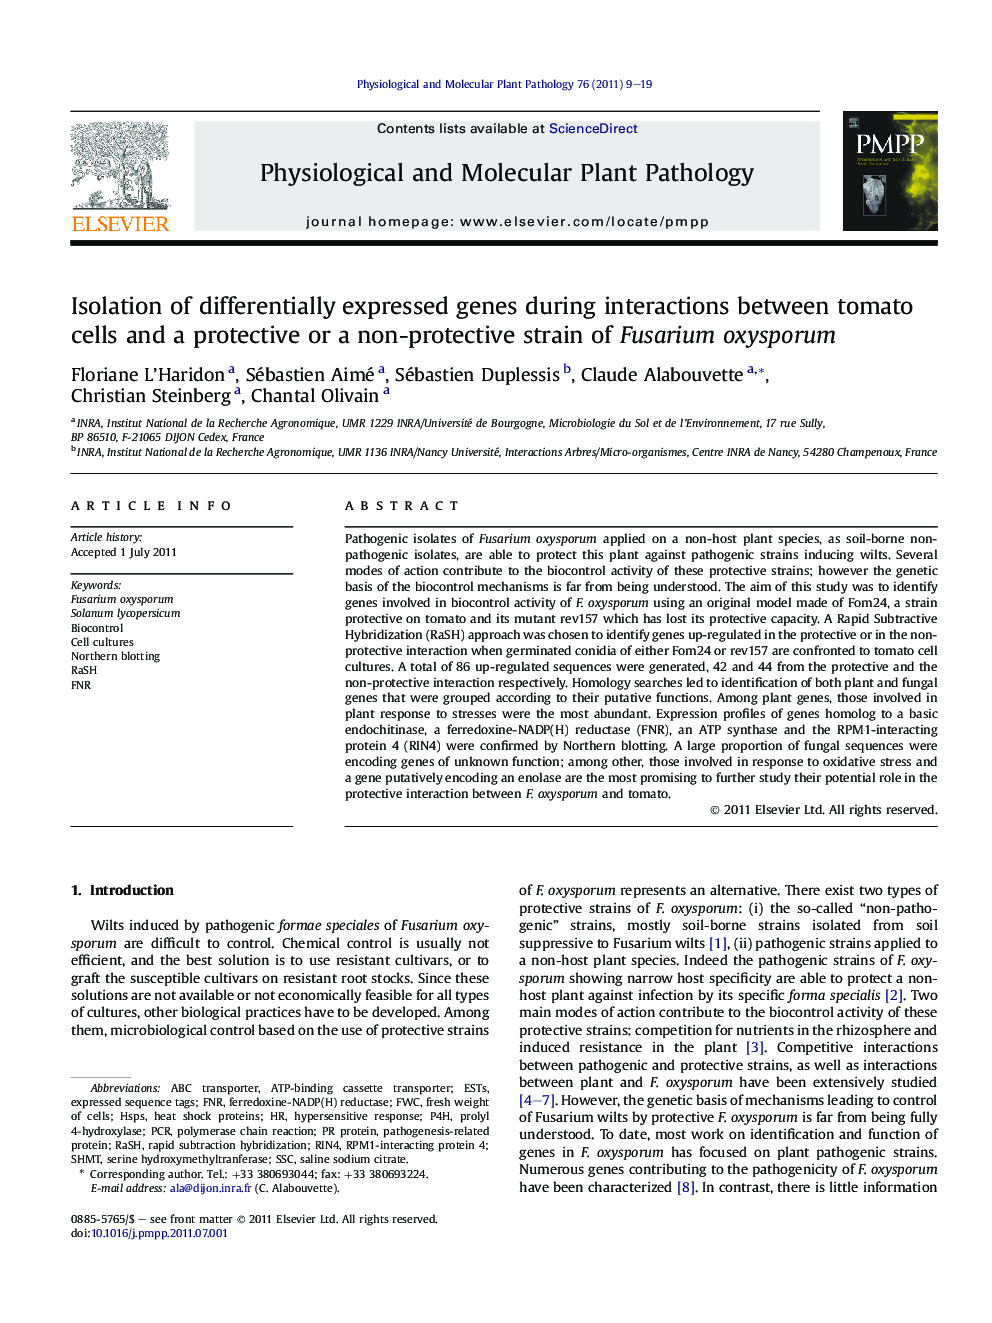 Isolation of differentially expressed genes during interactions between tomato cells and a protective or a non-protective strain of Fusarium oxysporum